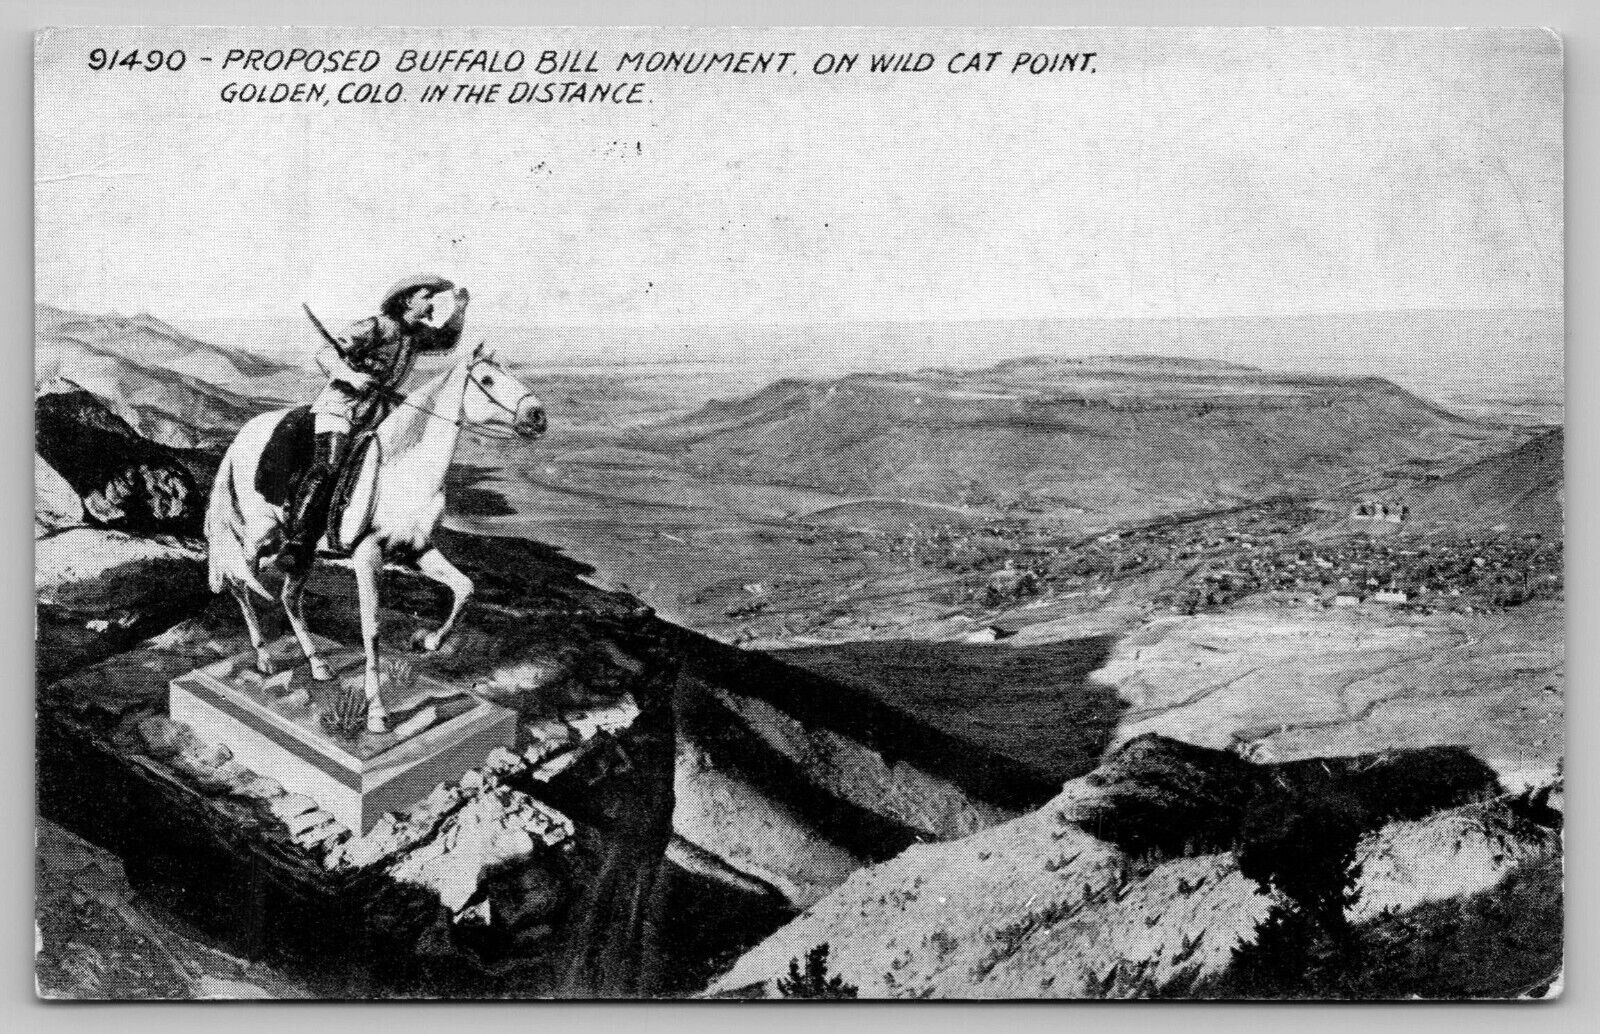 Postcard Proposed Buffalo Bill Monument On Wild Cat Point, Golden, CO